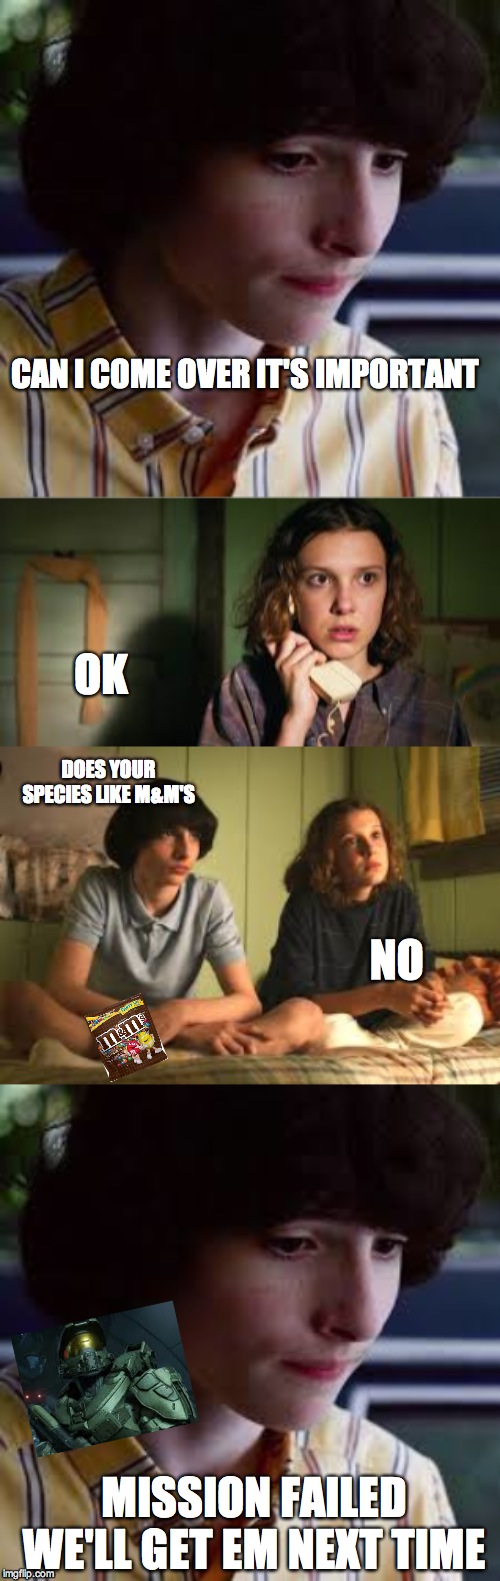 Mike learns El doesn't like M&M's | CAN I COME OVER IT'S IMPORTANT; OK; DOES YOUR SPECIES LIKE M&M'S; NO; MISSION FAILED WE'LL GET EM NEXT TIME | image tagged in funny | made w/ Imgflip meme maker